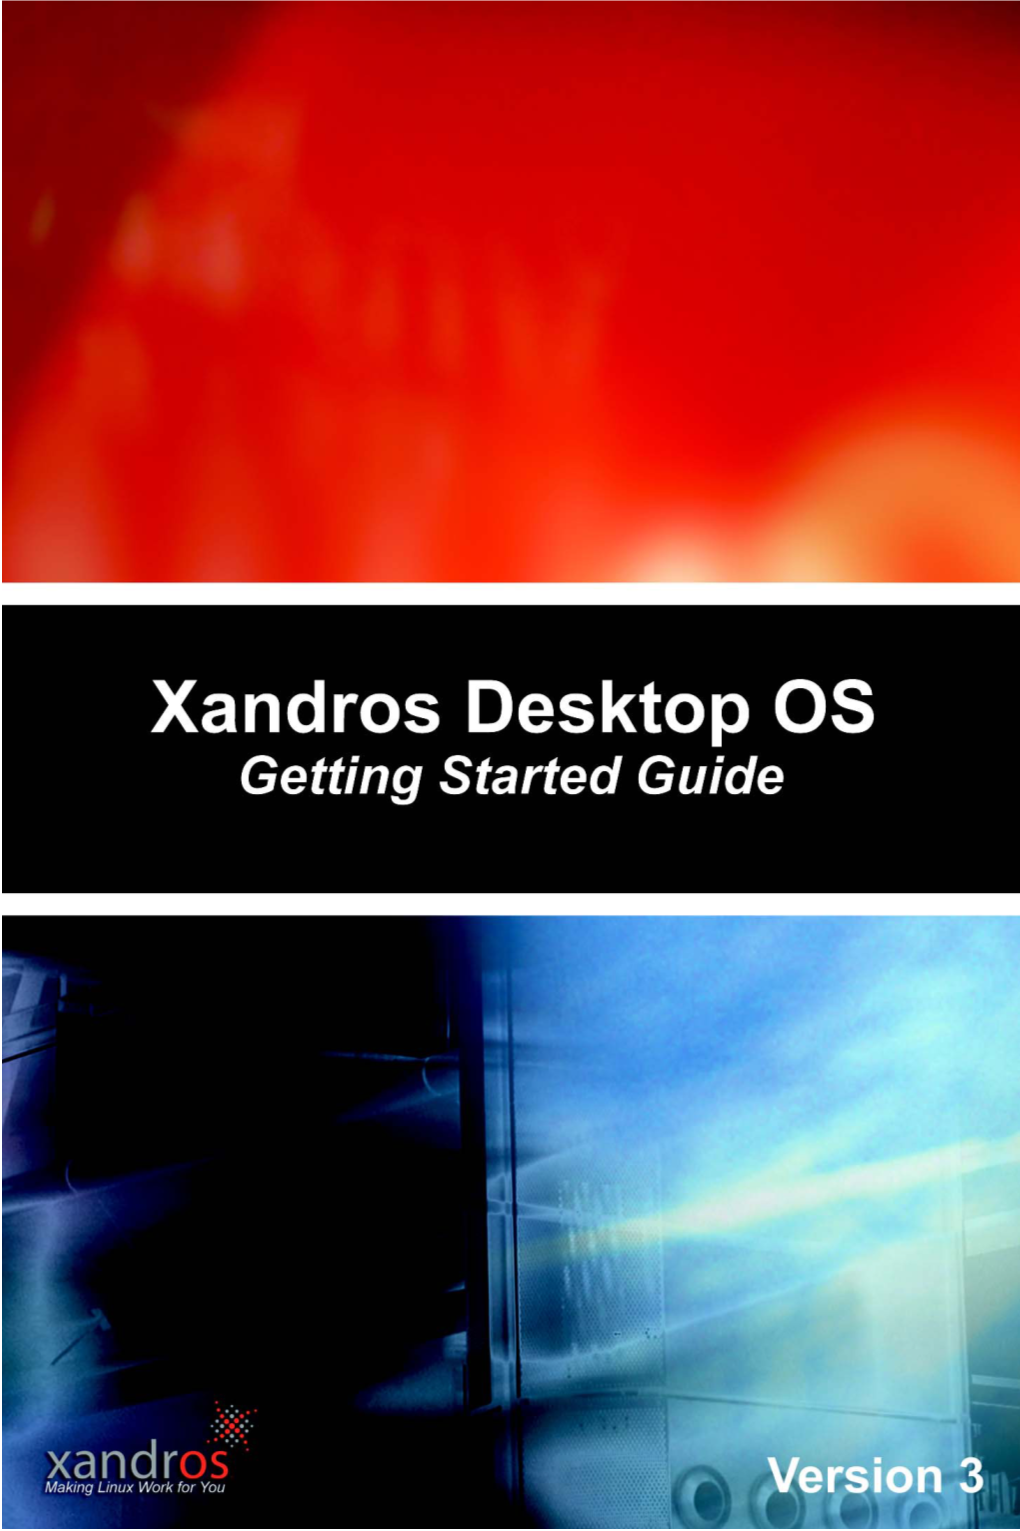 Xandros Desktop OS Getting Started Guide